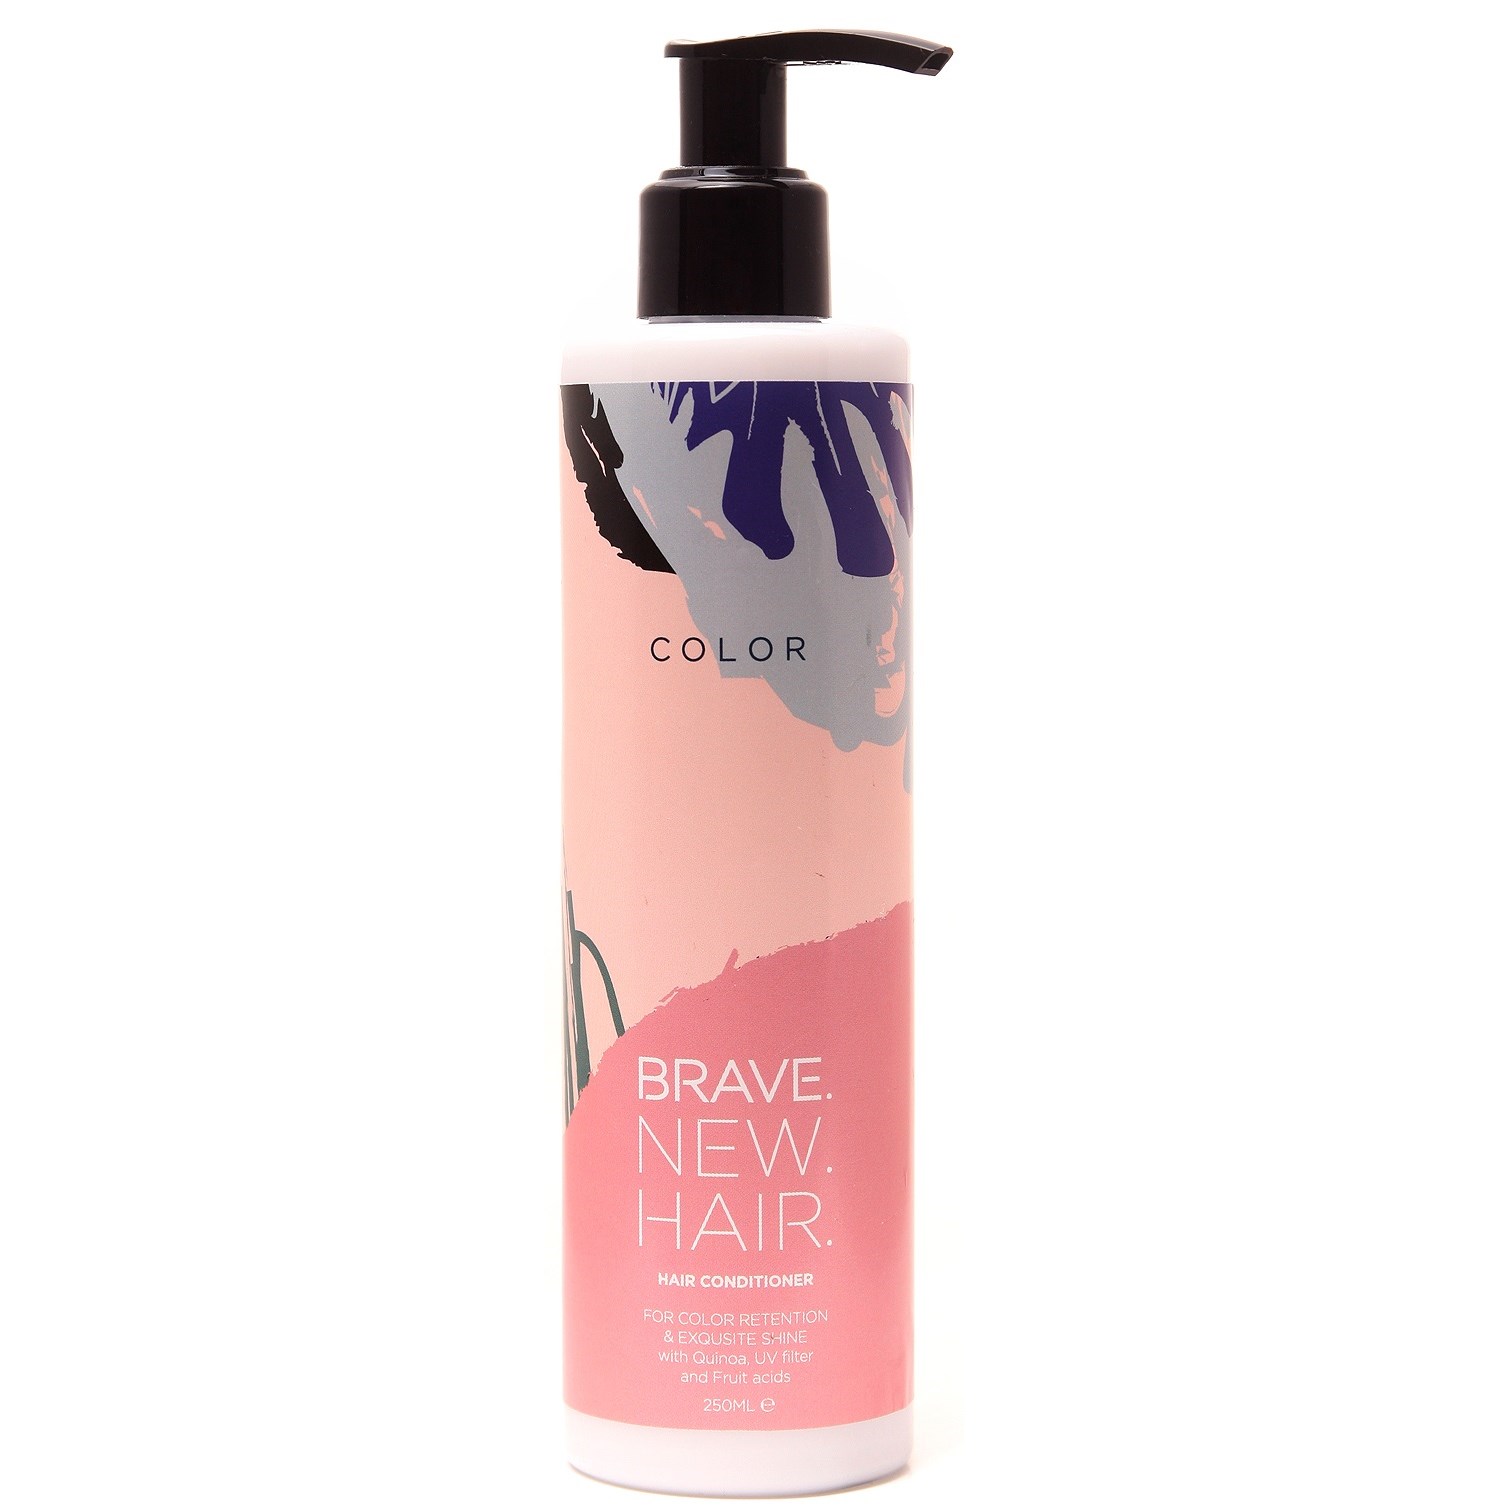 Brave. New. Hair. Color Conditioner 250ml